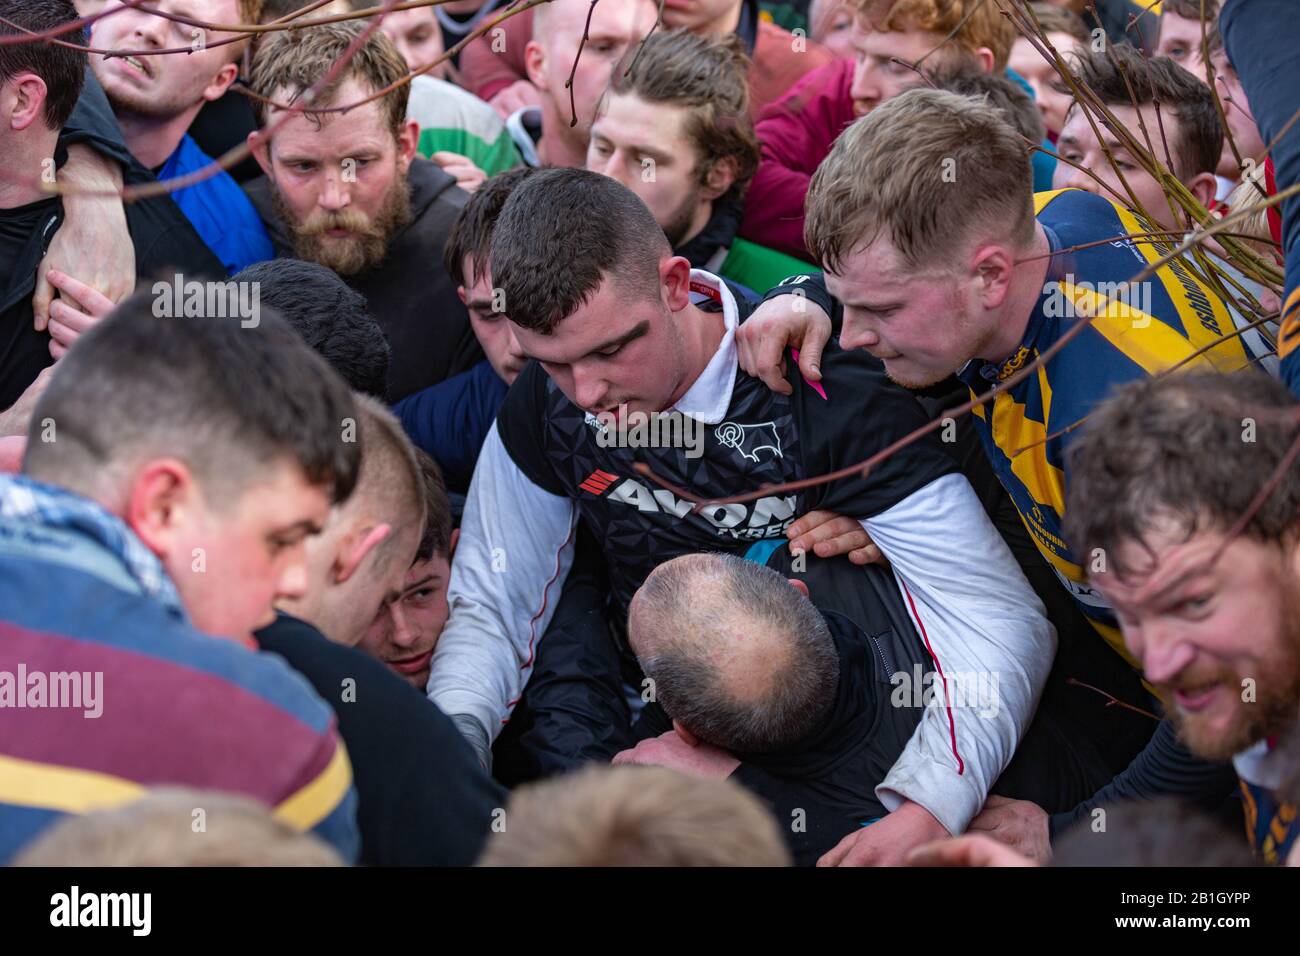 Ashbourne, UK. 25th Feb, 2020. The first day of the two day Shrovetide Football Game in the market town of Ashbourne, Derbyshire. The game is played with two teams, the Up'Ards and the Down'Ards. There are two goal posts 3 miles (4.8 km) apart, one at Sturston Mill (where the Up'Ards attempt to score), other at Clifton Mill (where the Down'Ards score). Penelope Barritt/Alamy Live News Stock Photo